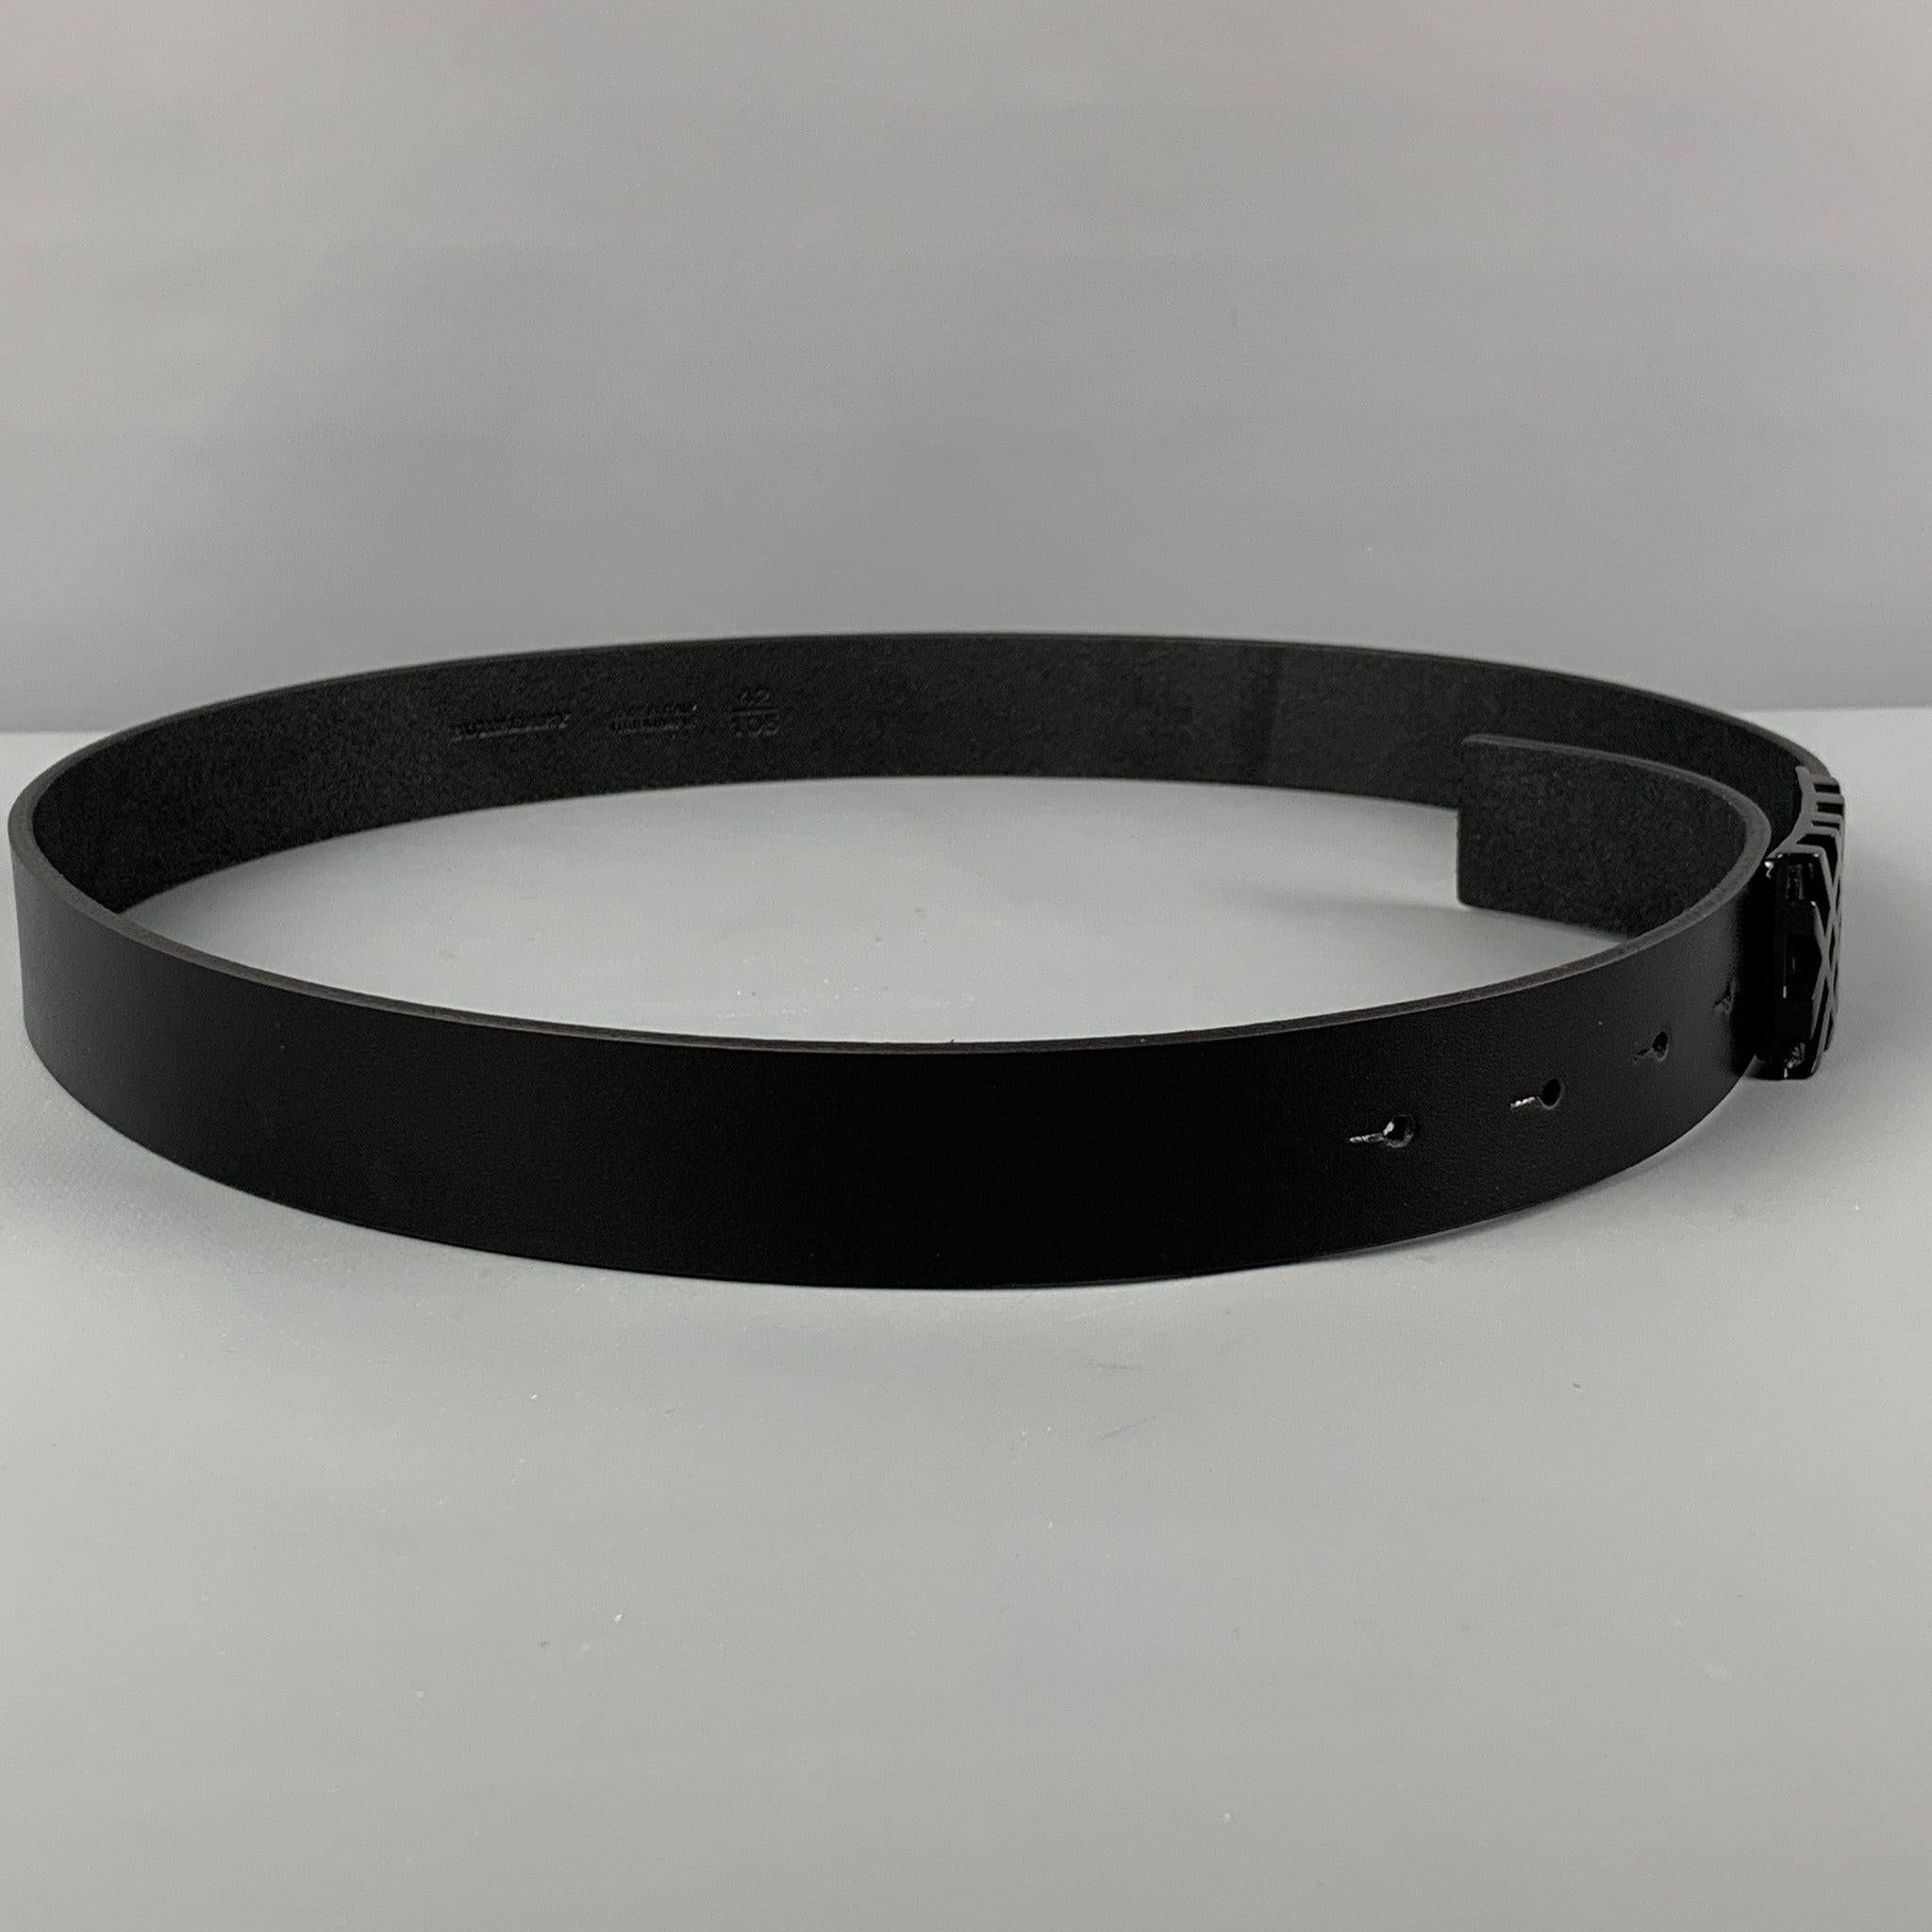 BURBERRY belt comes in a black leather featuring a geometric buckle detail. Comes with box. Made in Italy.
Very Good
Pre-Owned Condition. Belt has been professionally altered.  

Marked:   42/105Length: 39 inches  Width: 1.25 inches  Fits: 31 inches